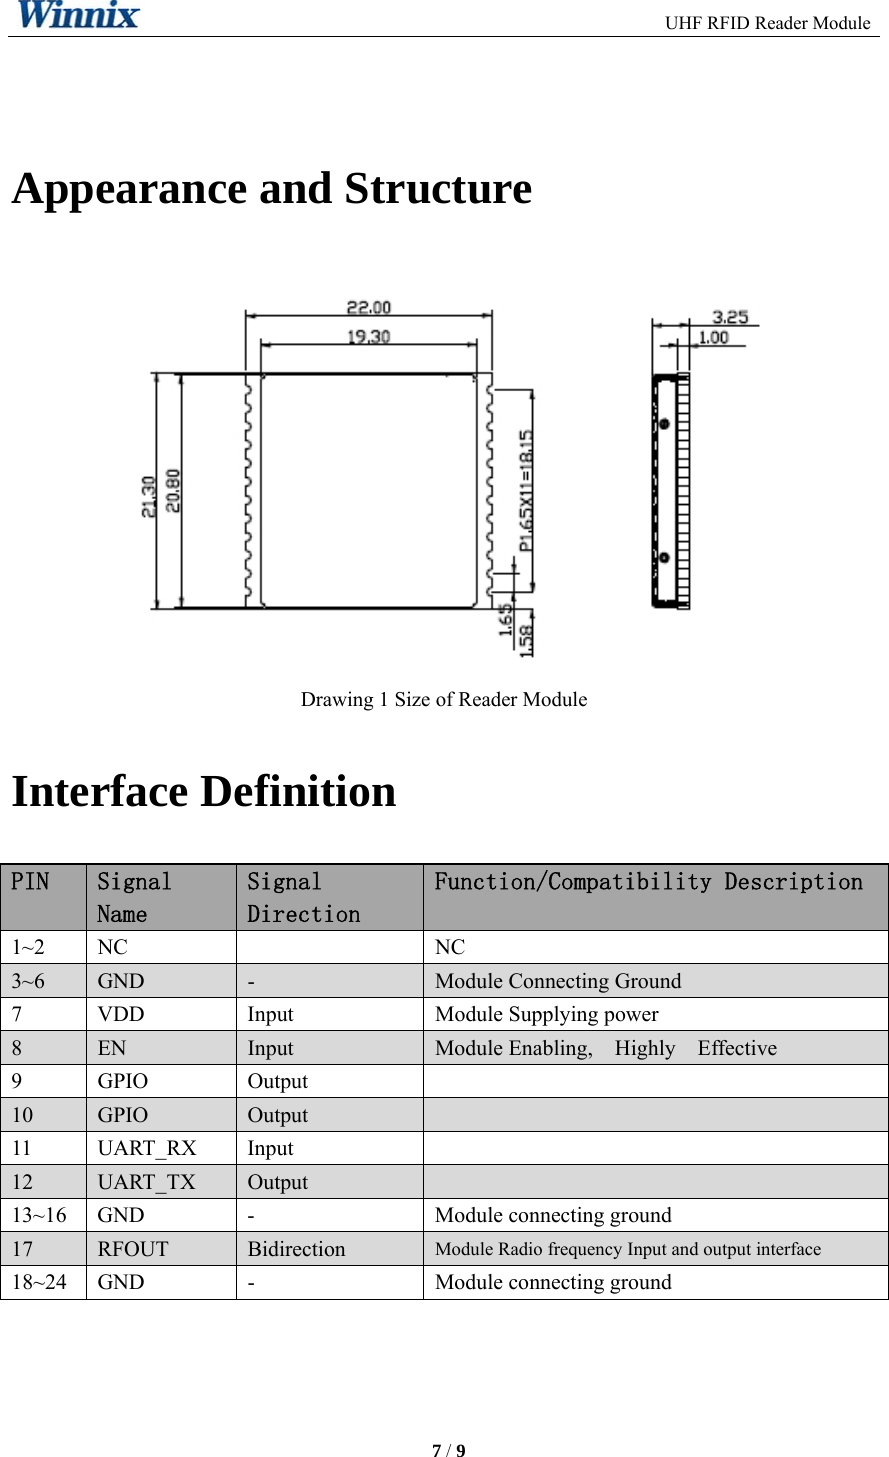                                                         UHF RFID Reader Module     7 / 9     Appearance and Structure  Drawing 1 Size of Reader Module   Interface Definition PIN  Signal Name Signal Direction Function/Compatibility Description 1~2  NC   NC 3~6  GND  -  Module Connecting Ground 7 VDD  Input  Module Supplying power 8  EN  Input  Module Enabling,  Highly  Effective 9 GPIO  Output   10  GPIO  Output   11 UART_RX Input   12  UART_TX  Output   13~16 GND  -  Module connecting ground 17  RFOUT  Bidirection  Module Radio frequency Input and output interface 18~24  GND  -  Module connecting ground 